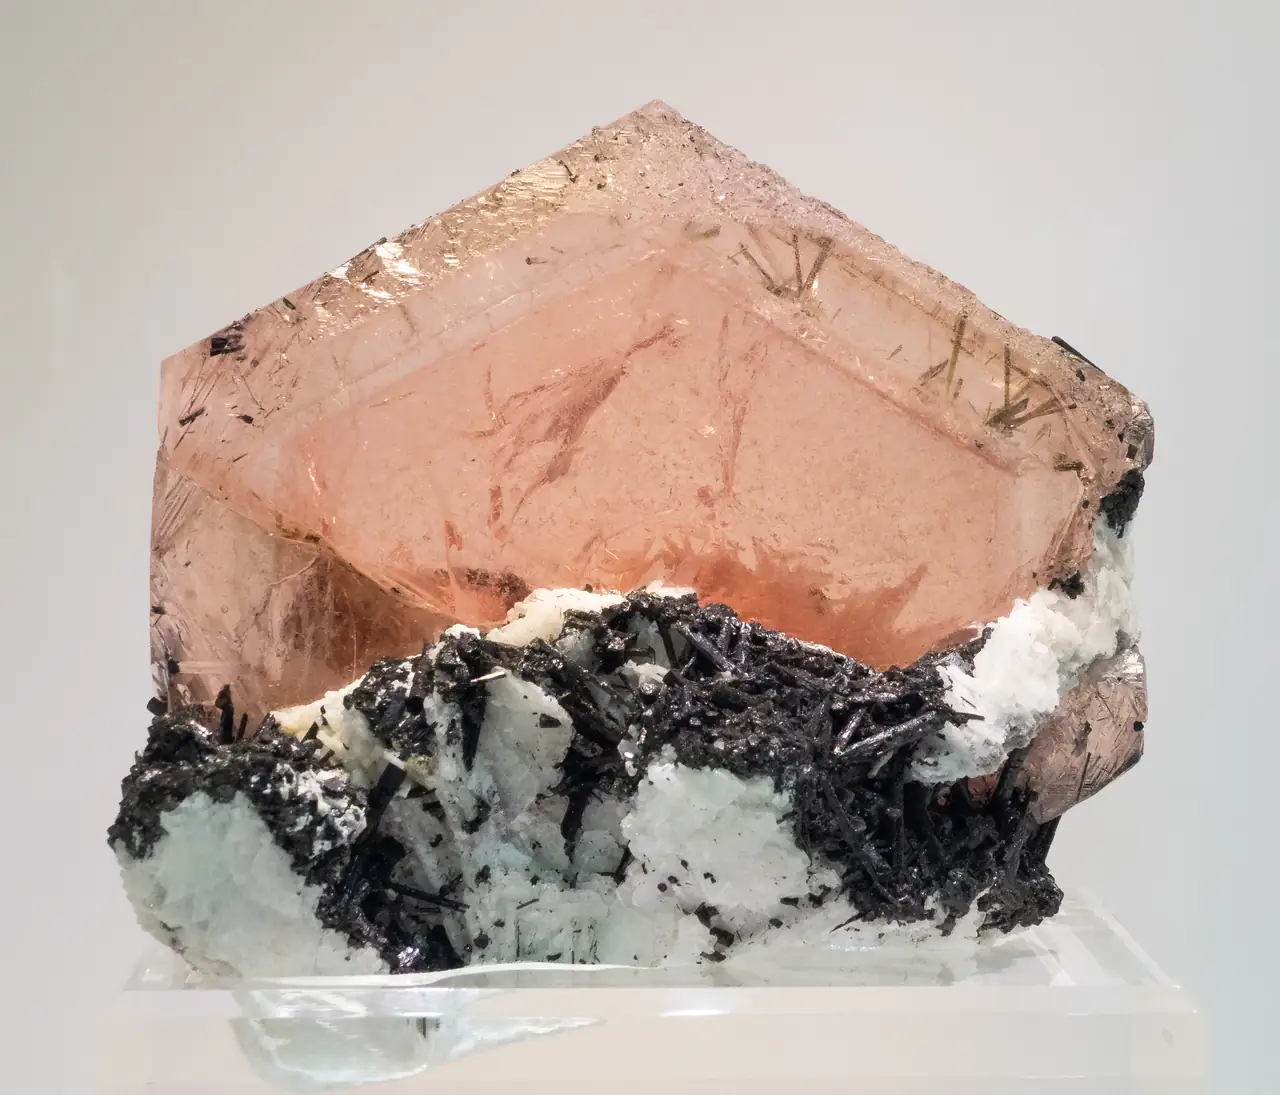 Gemmy and perfectly shaped morganite crystal from Urucum Mine, Doce Valley, Minas Gerais, Brazil.